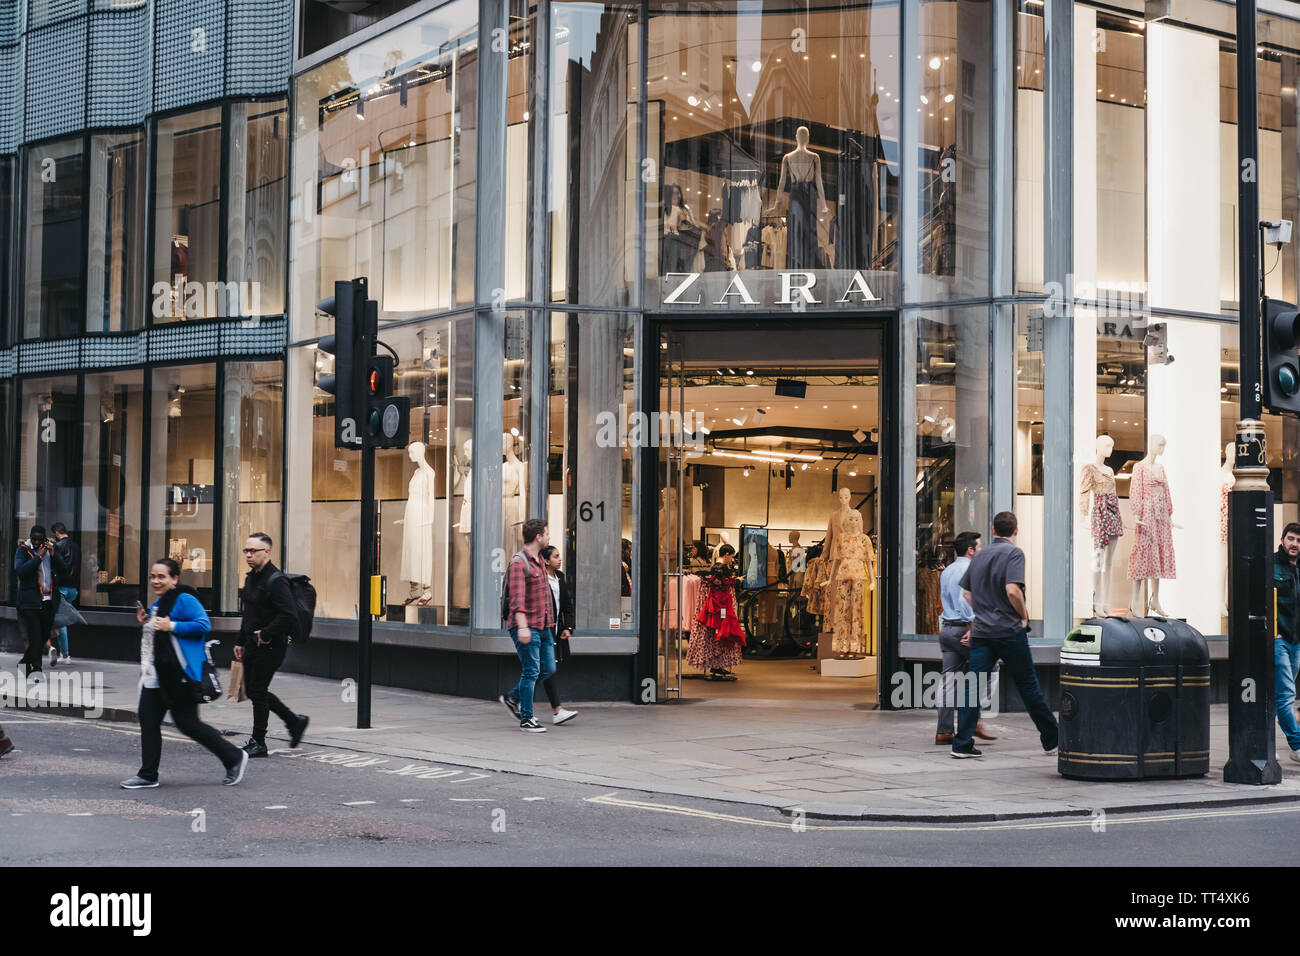 London, UK - June 5, 2019: People walking in front of Zara shop on Oxford  Street, London. Oxford street is one of the most famous shopping streets in  Stock Photo - Alamy